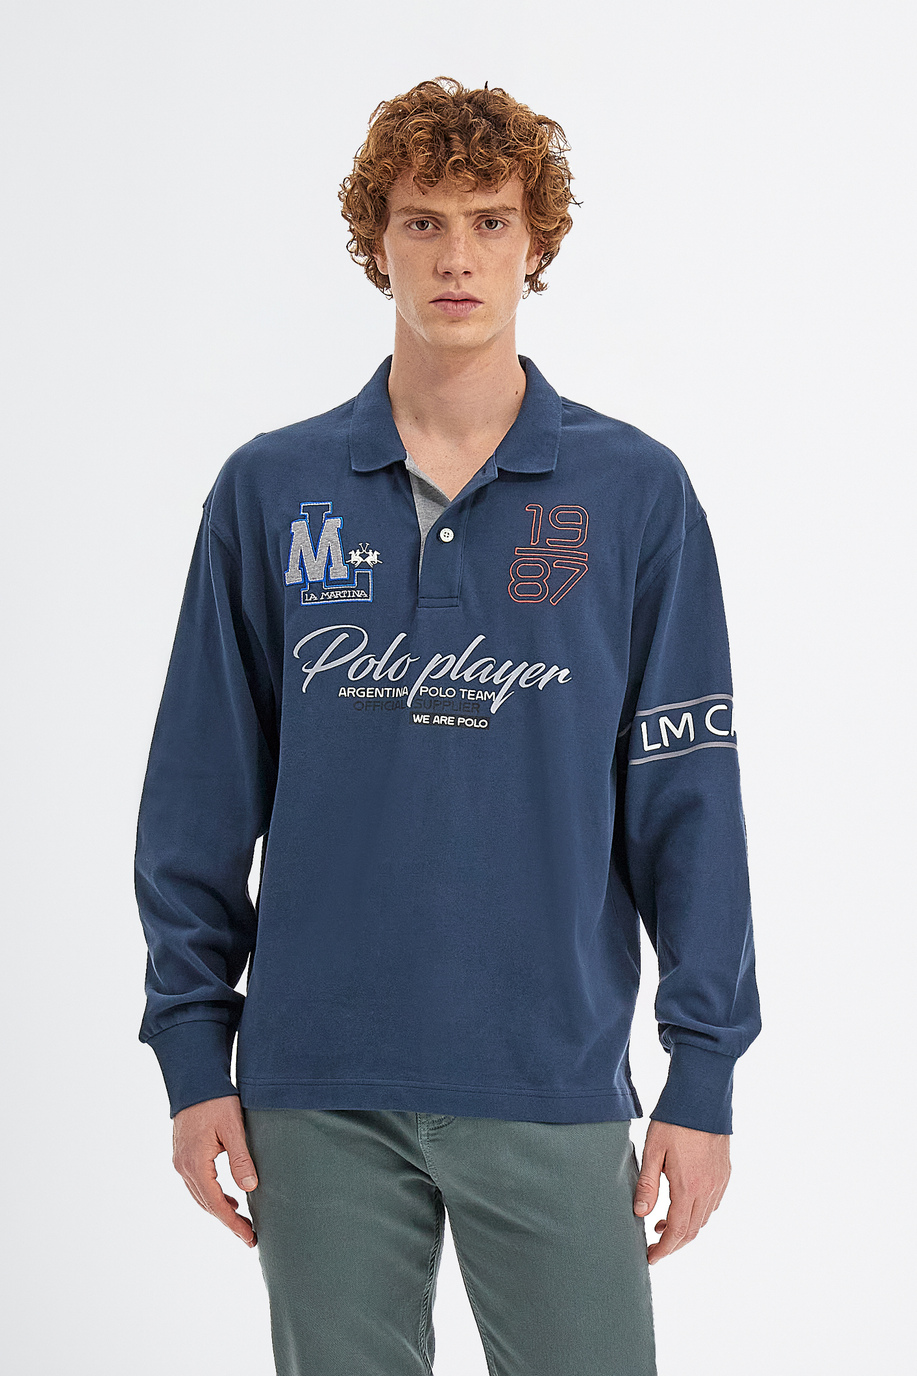 Men’s polo shirt Inmortales in cotton jersey comfort fit long sleeves - Replicas of major tournaments | La Martina - Official Online Shop